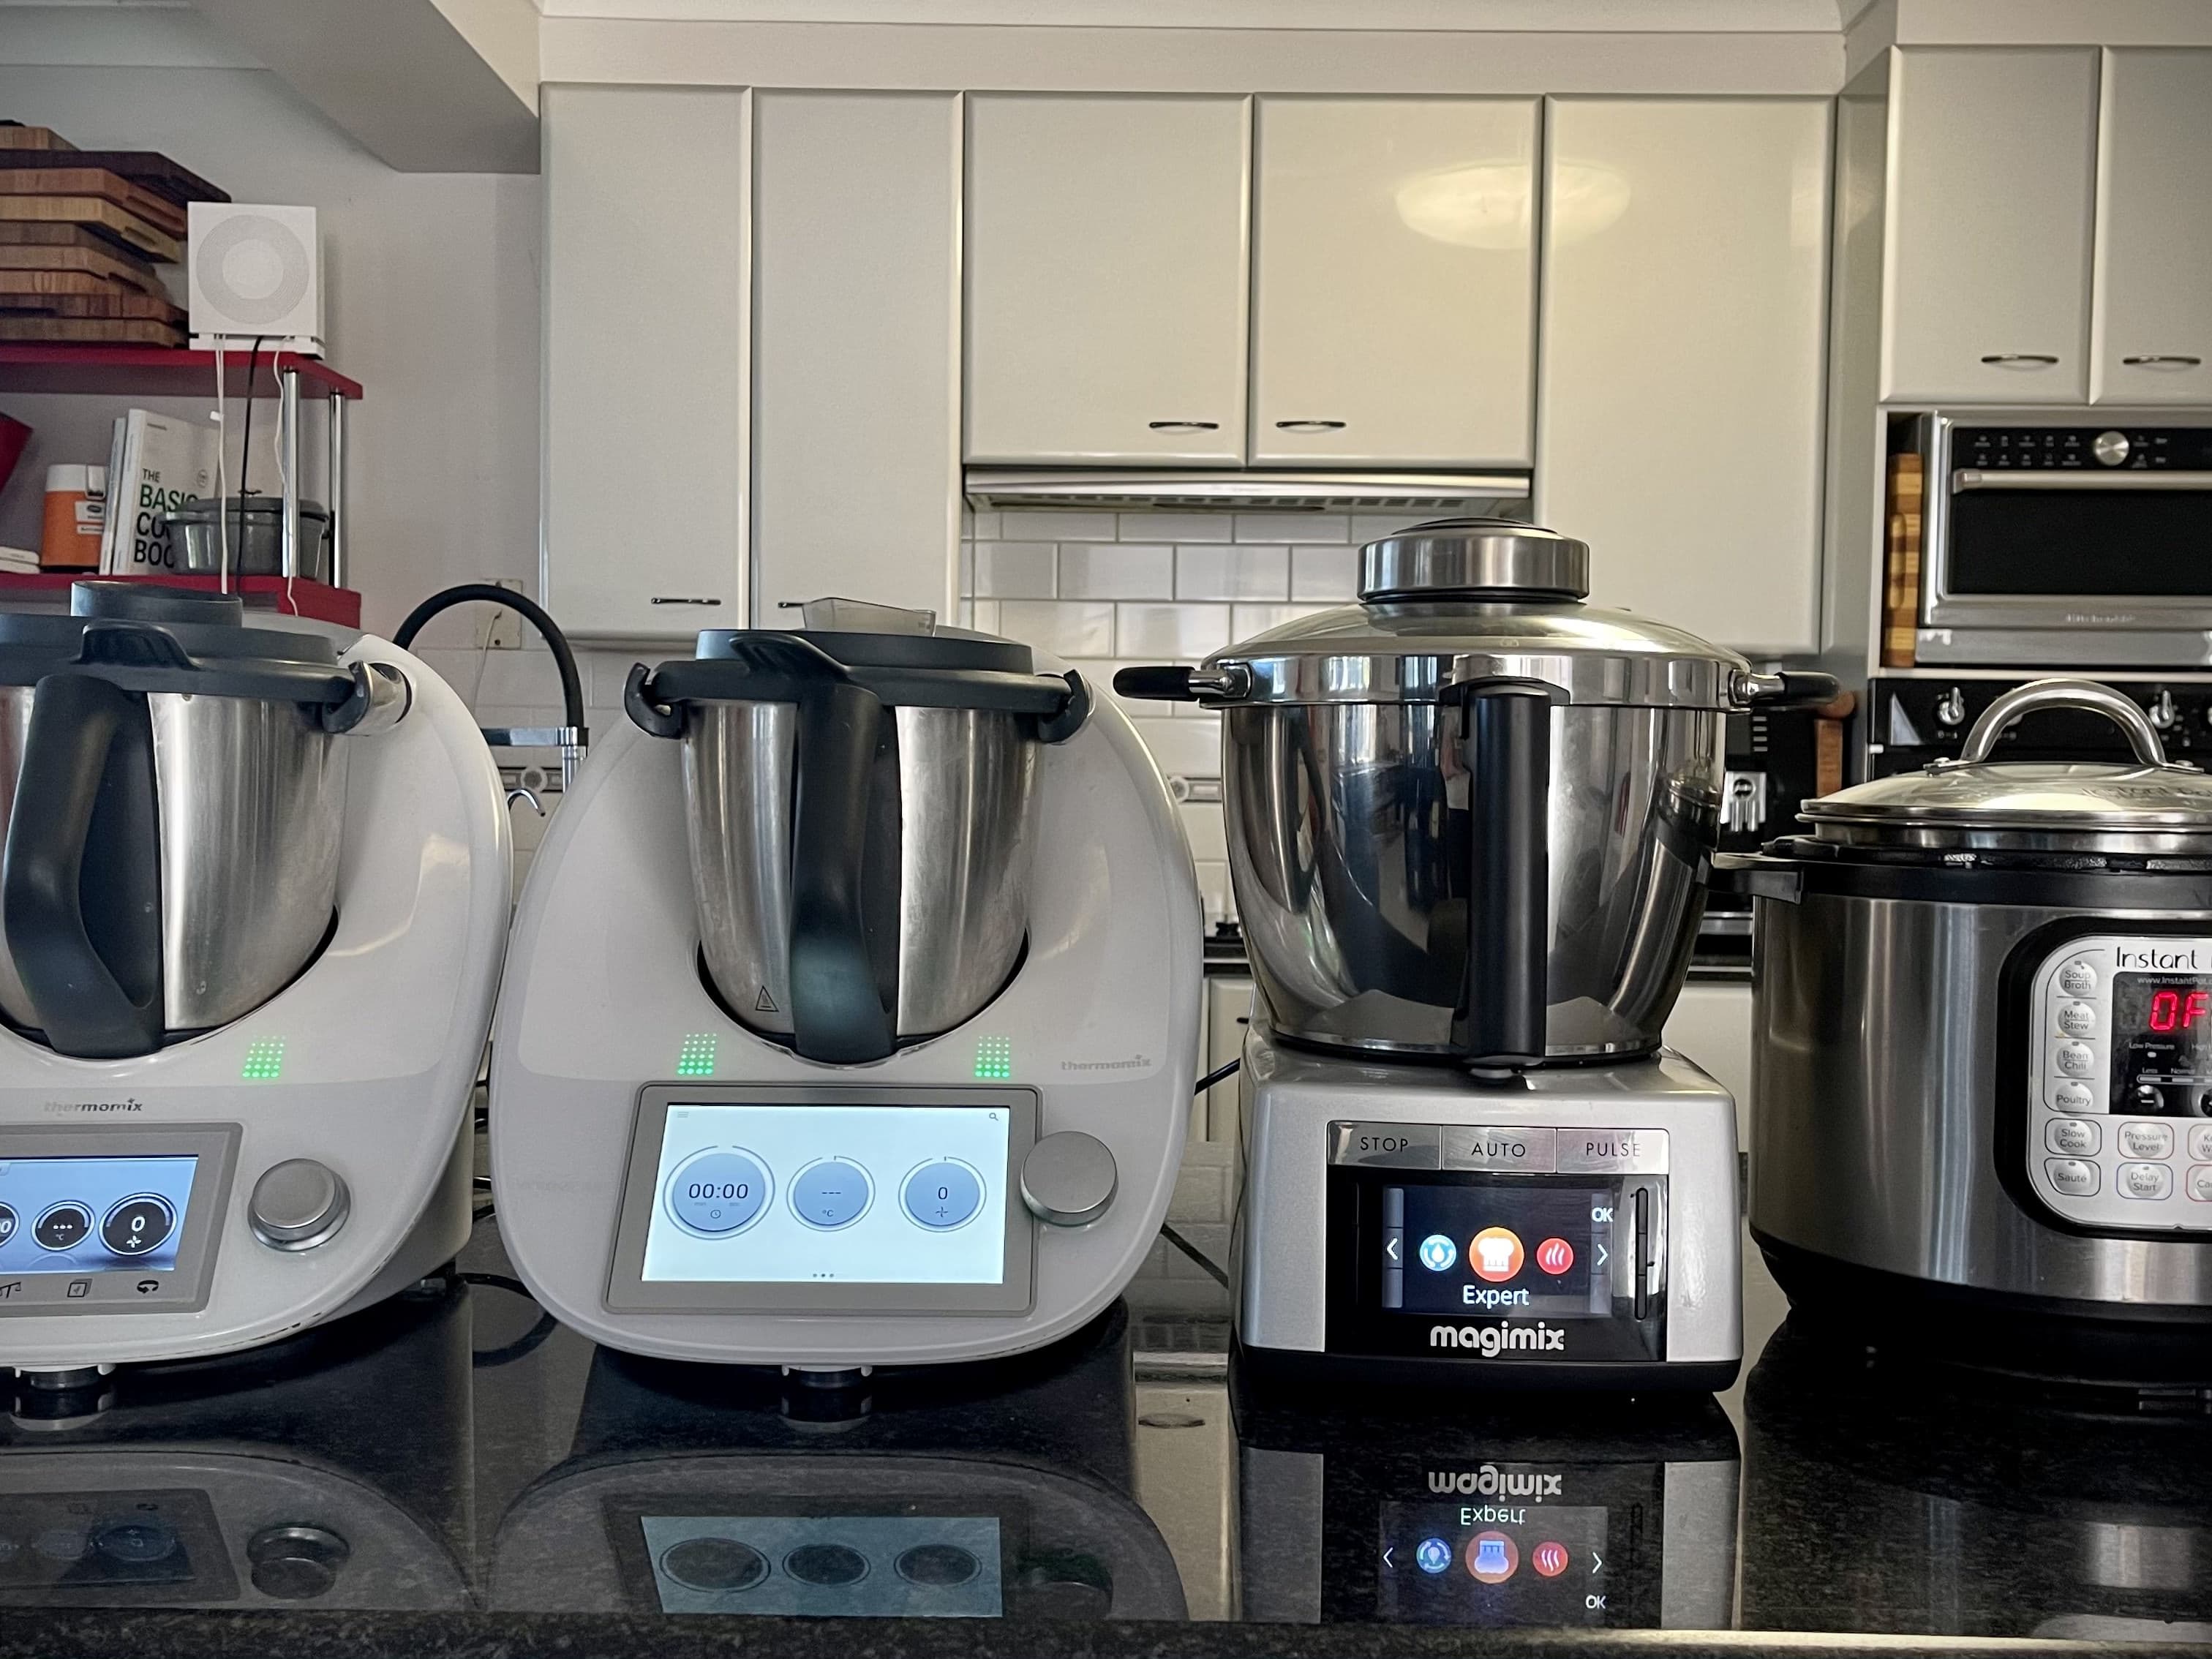 Magimix Cook Thermomix - Mad Creations Hub